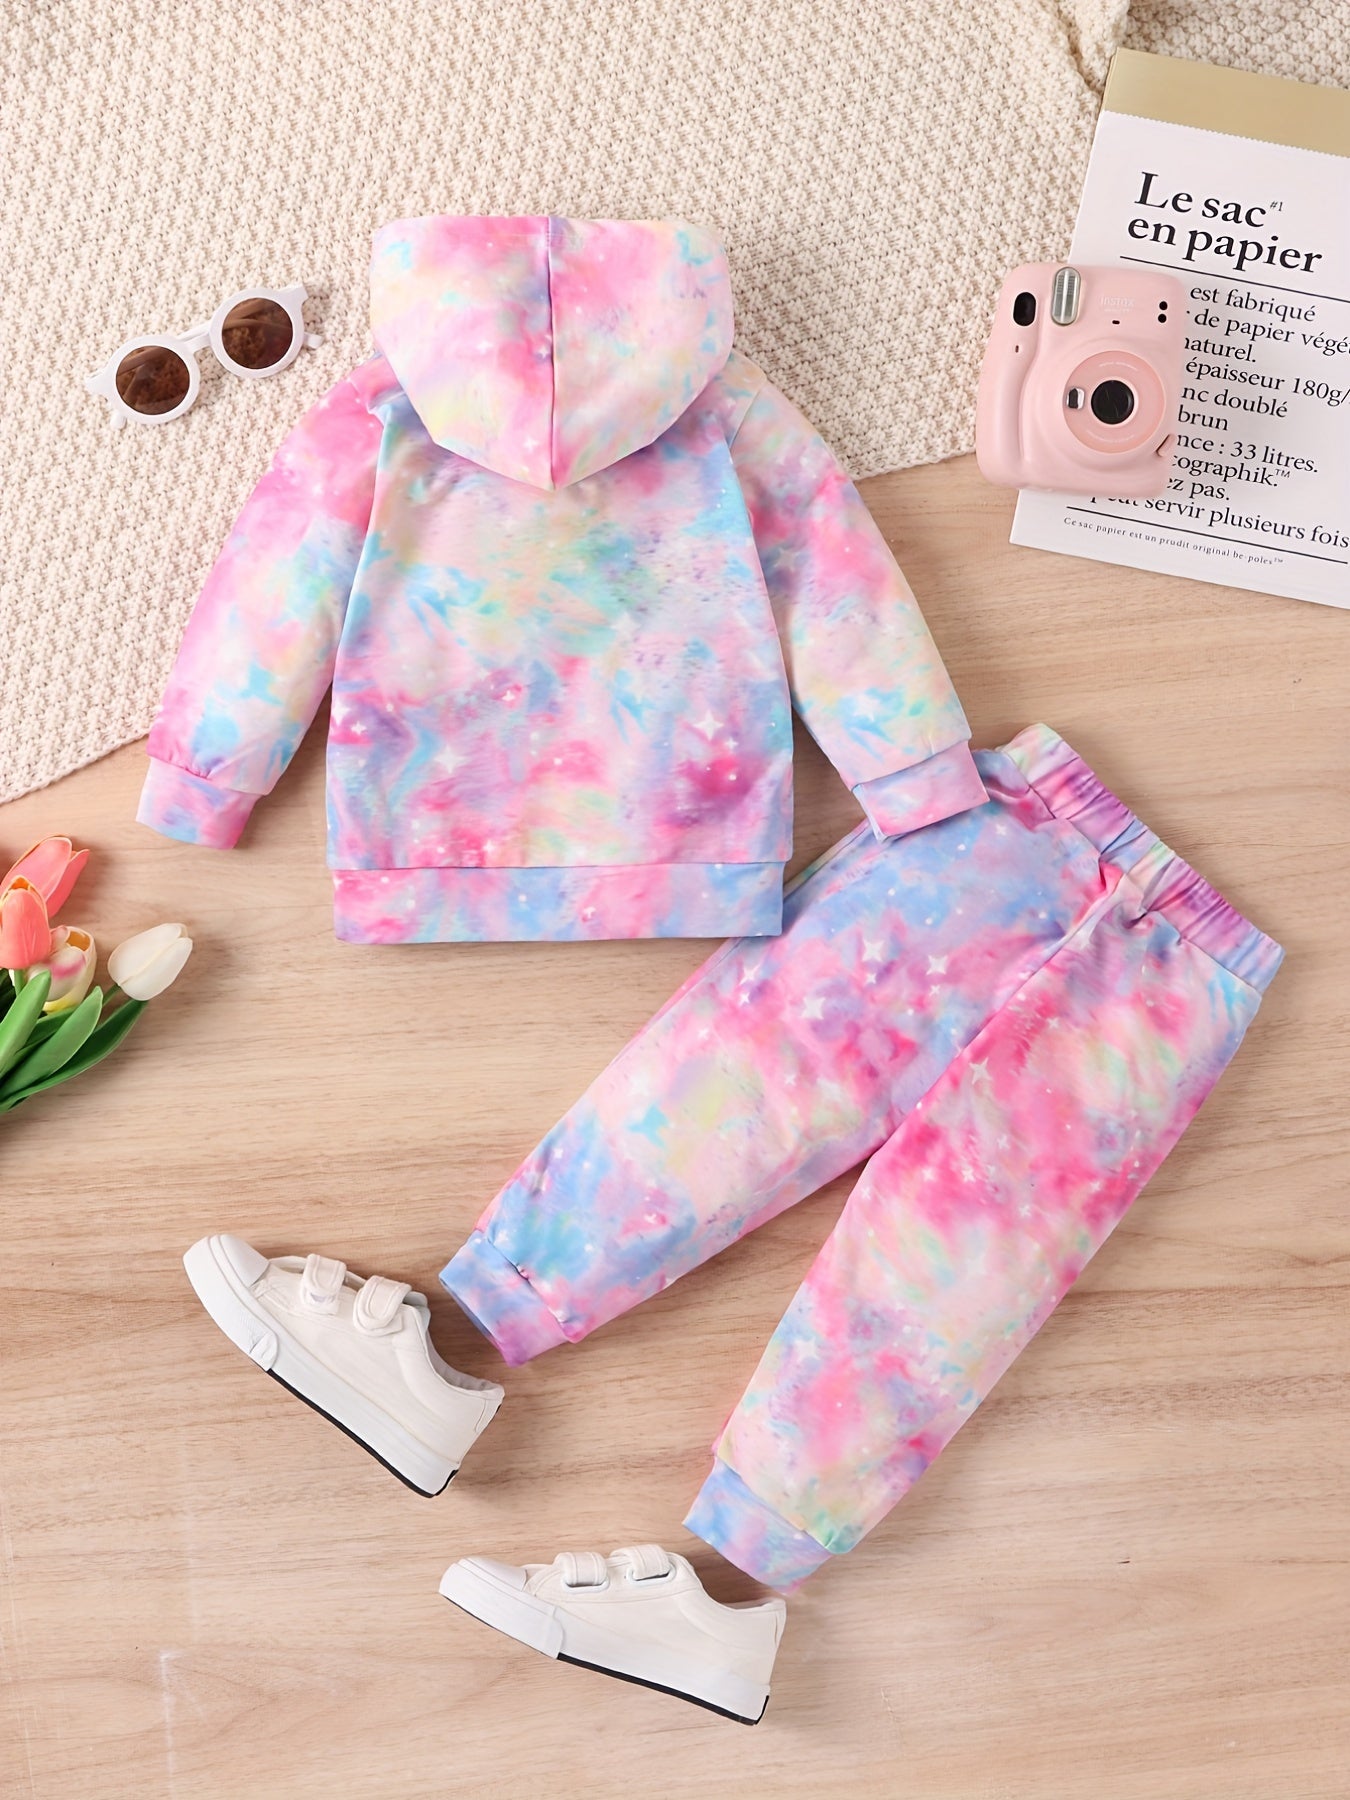 2pcs Girl's Nebula Tie-dye Outfit, Sweatshirt & Sweatpants Set, MAMA' GIRL Print Long Sleeve Top, Toddler Kid's Clothes For Spring Fall Winter